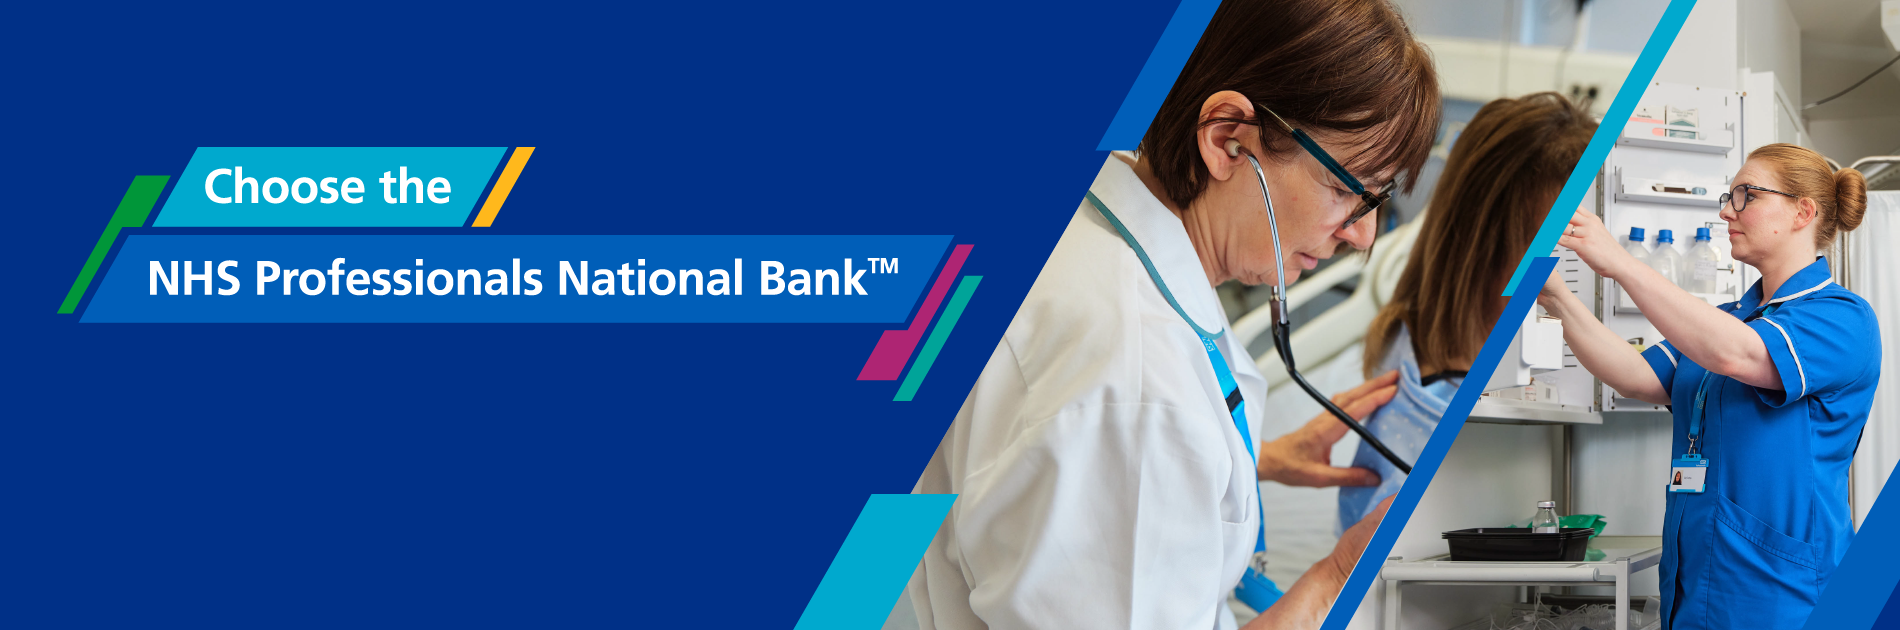 National Bank for Healthcare Professionals: Two female Healthcare Professionals performing their duties